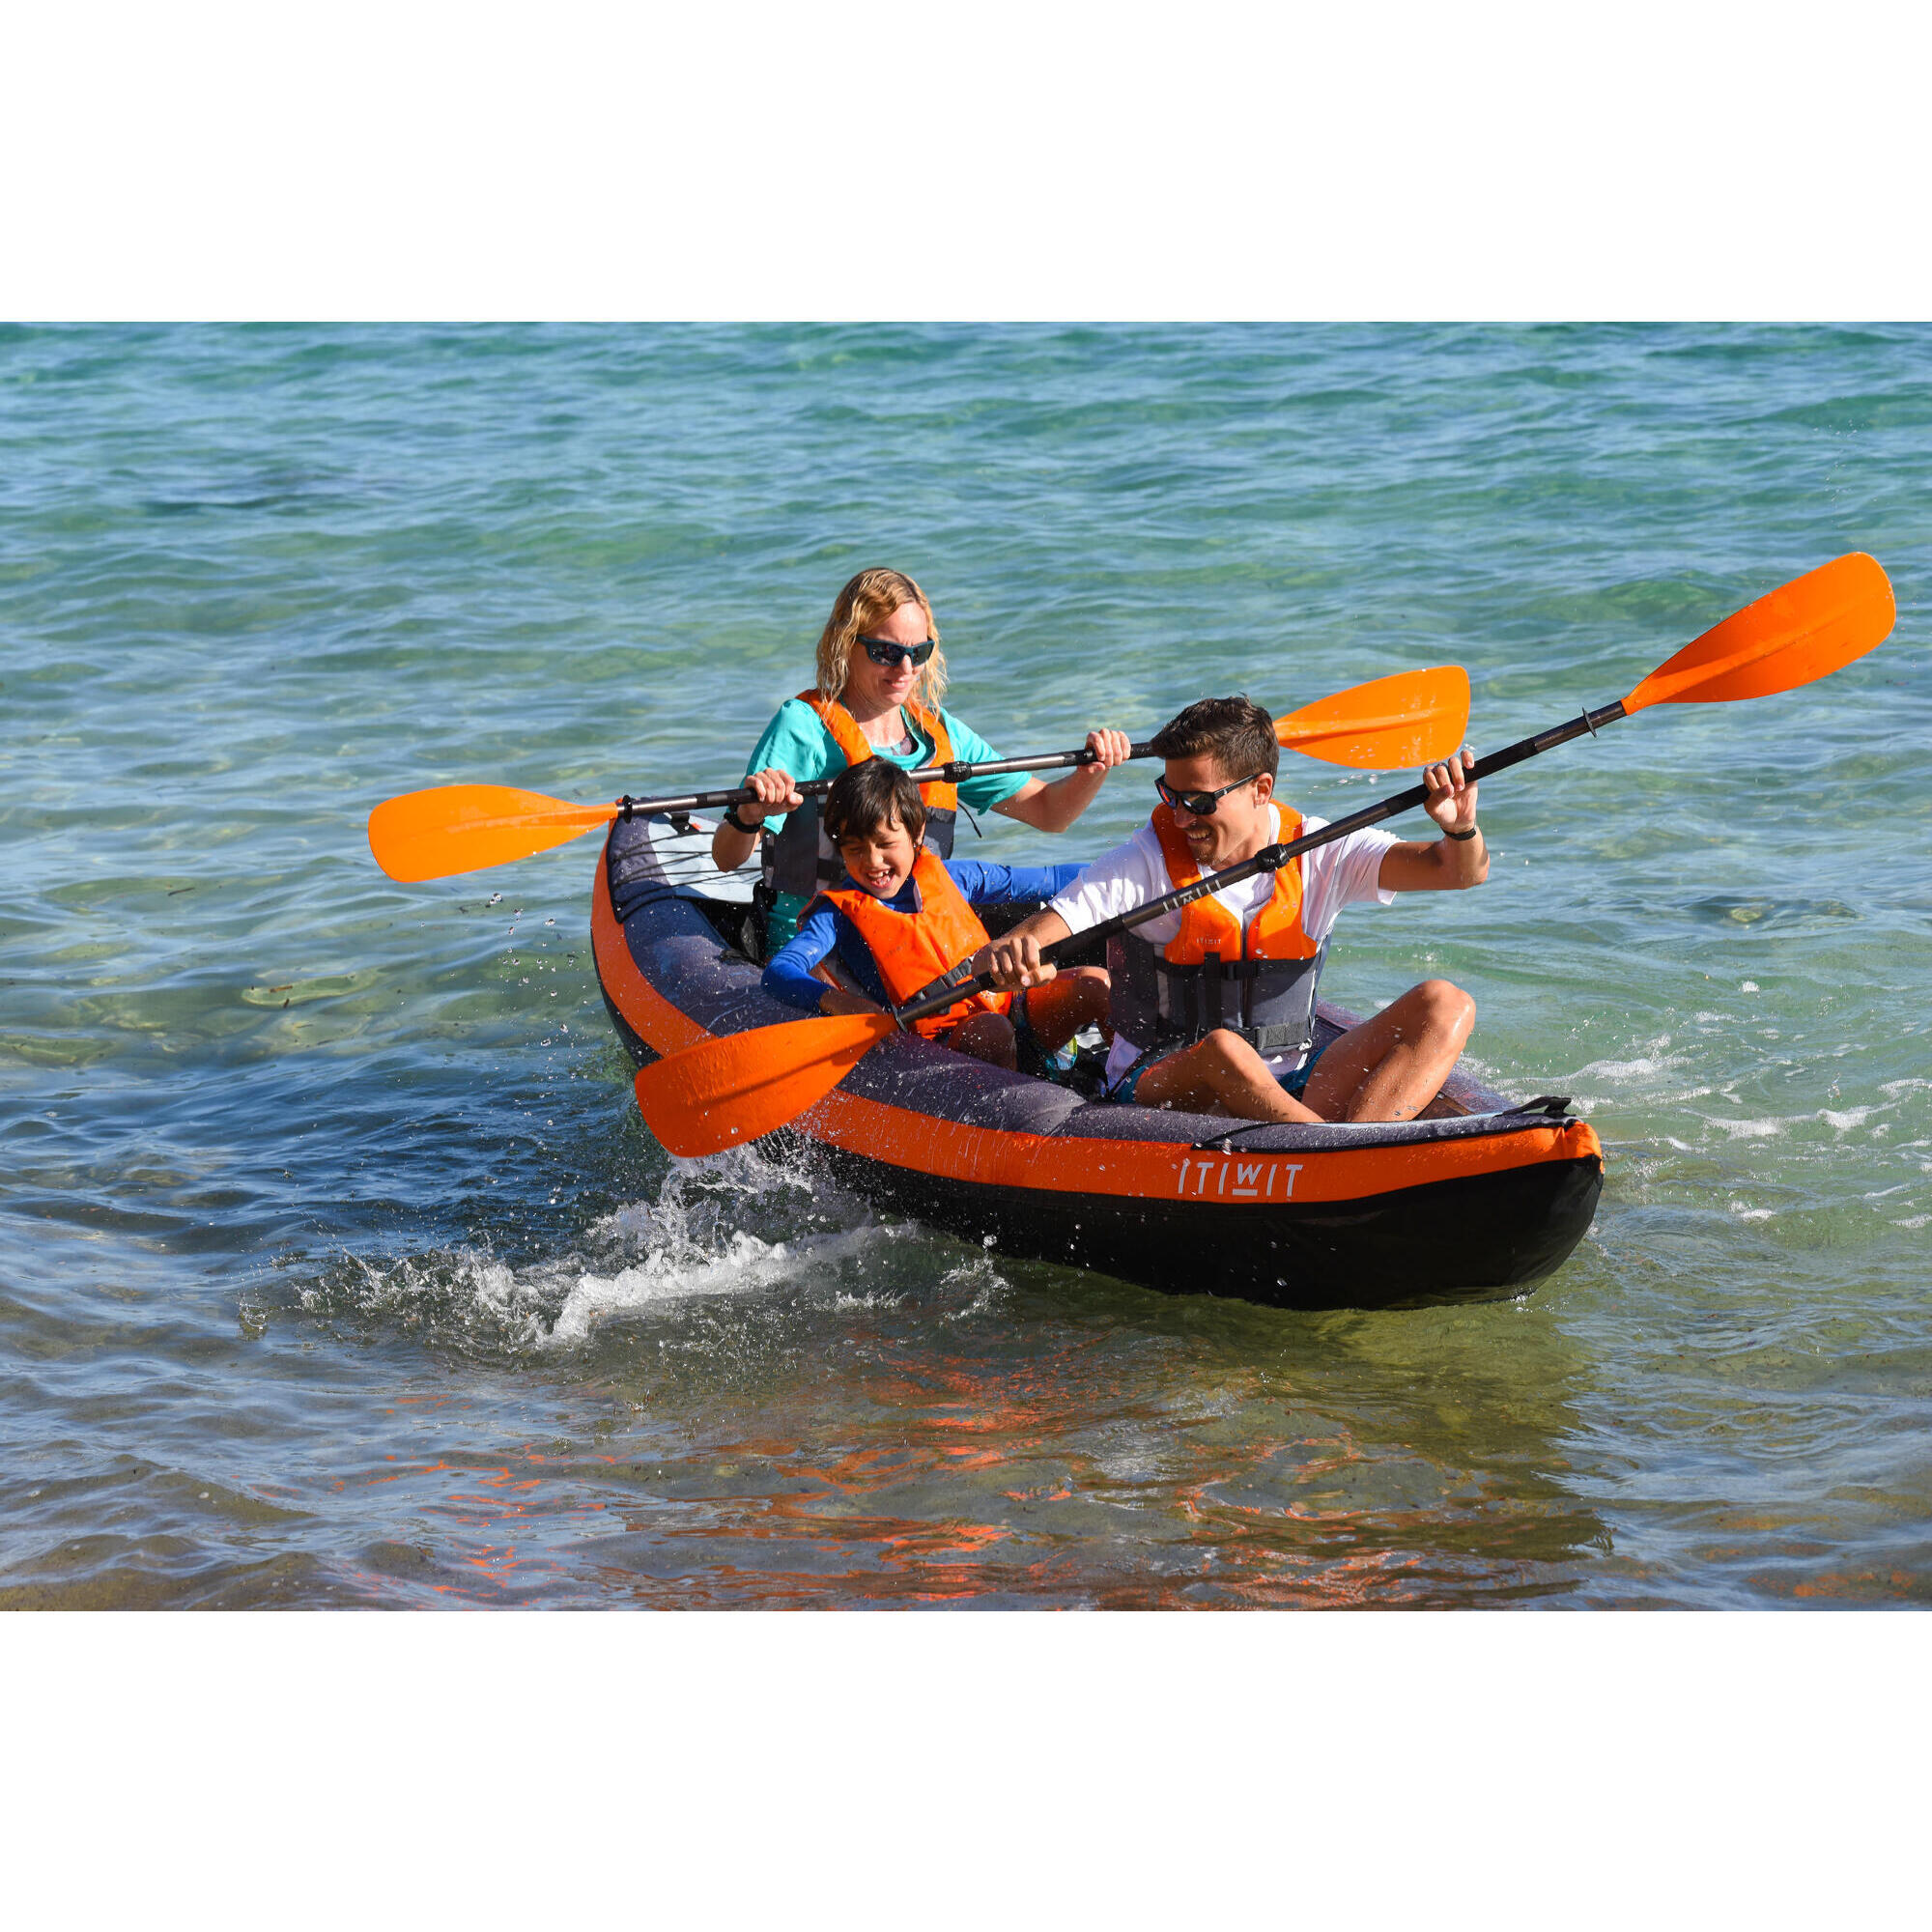 Itiwit inflatable Kayak 3 Person 